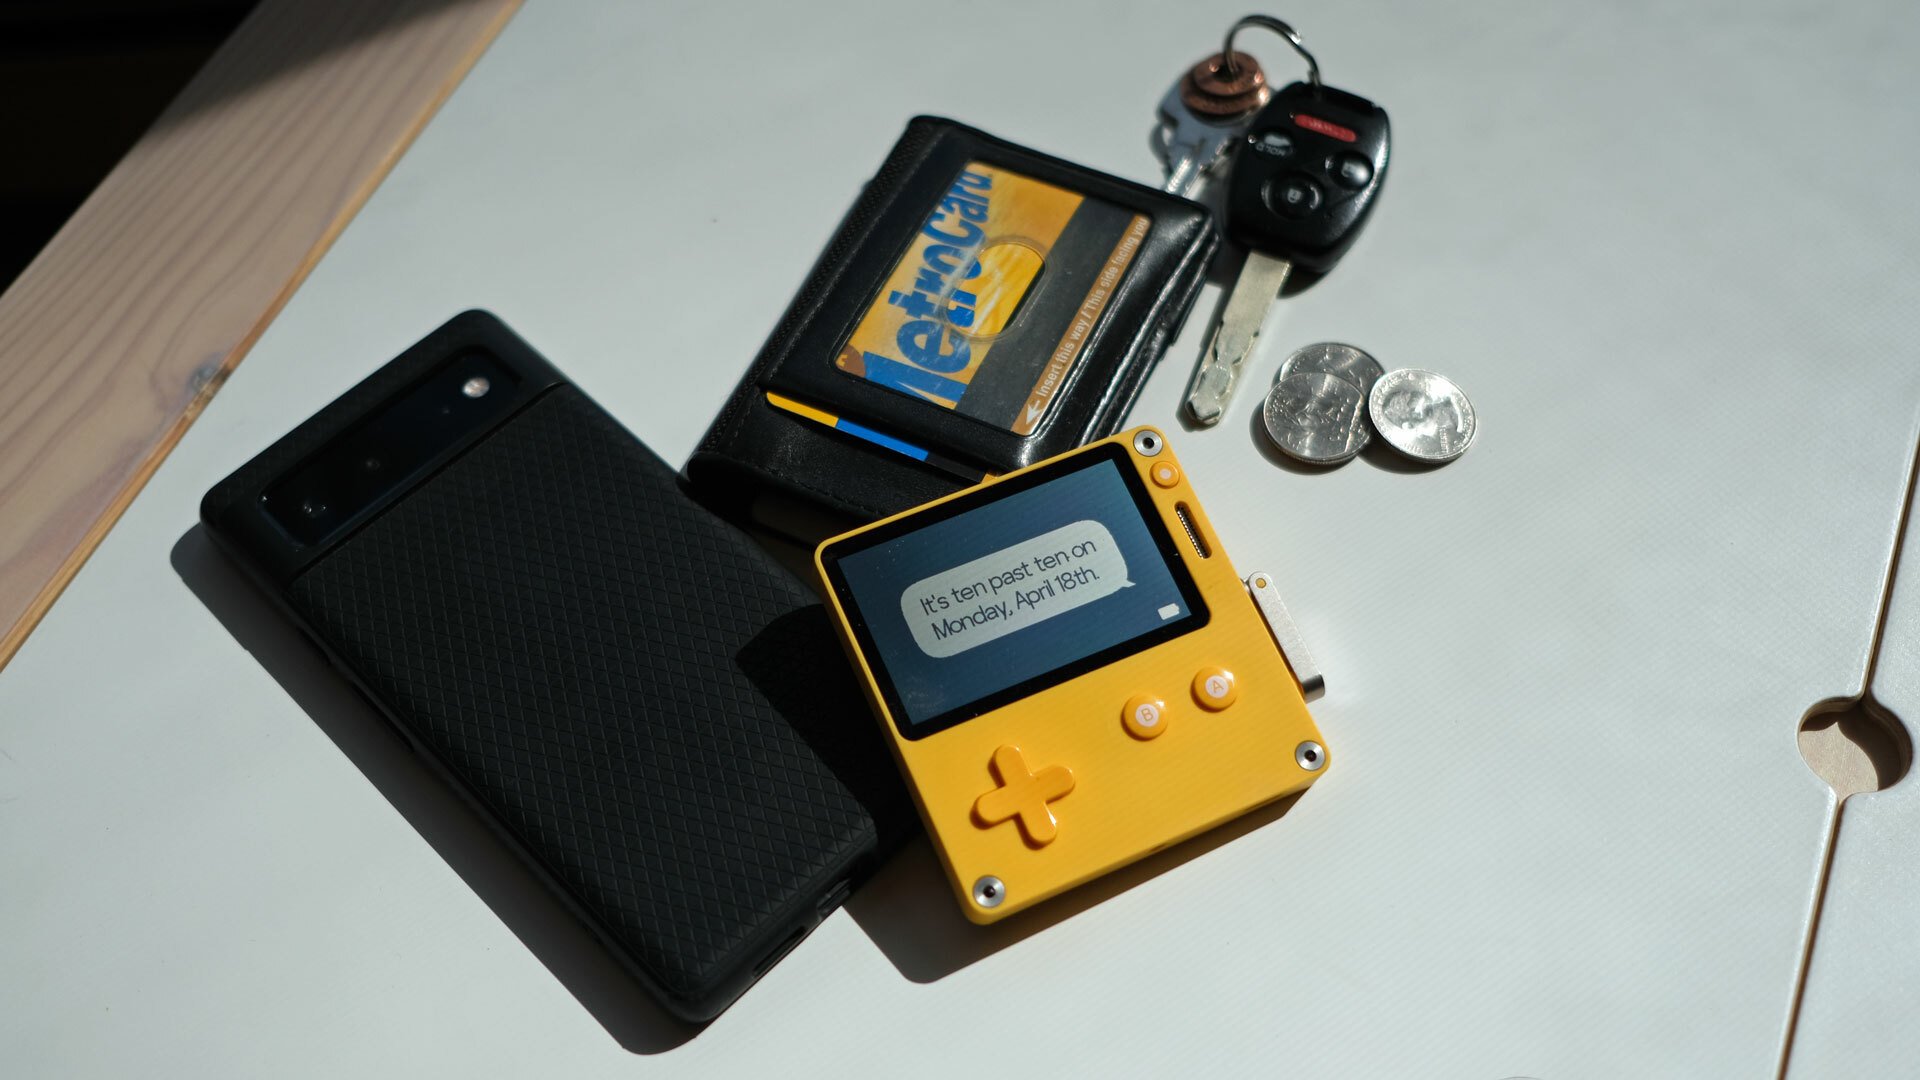 A Playdate gaming device seen from above, surrounded by a phone, wallet, keys, and coins.